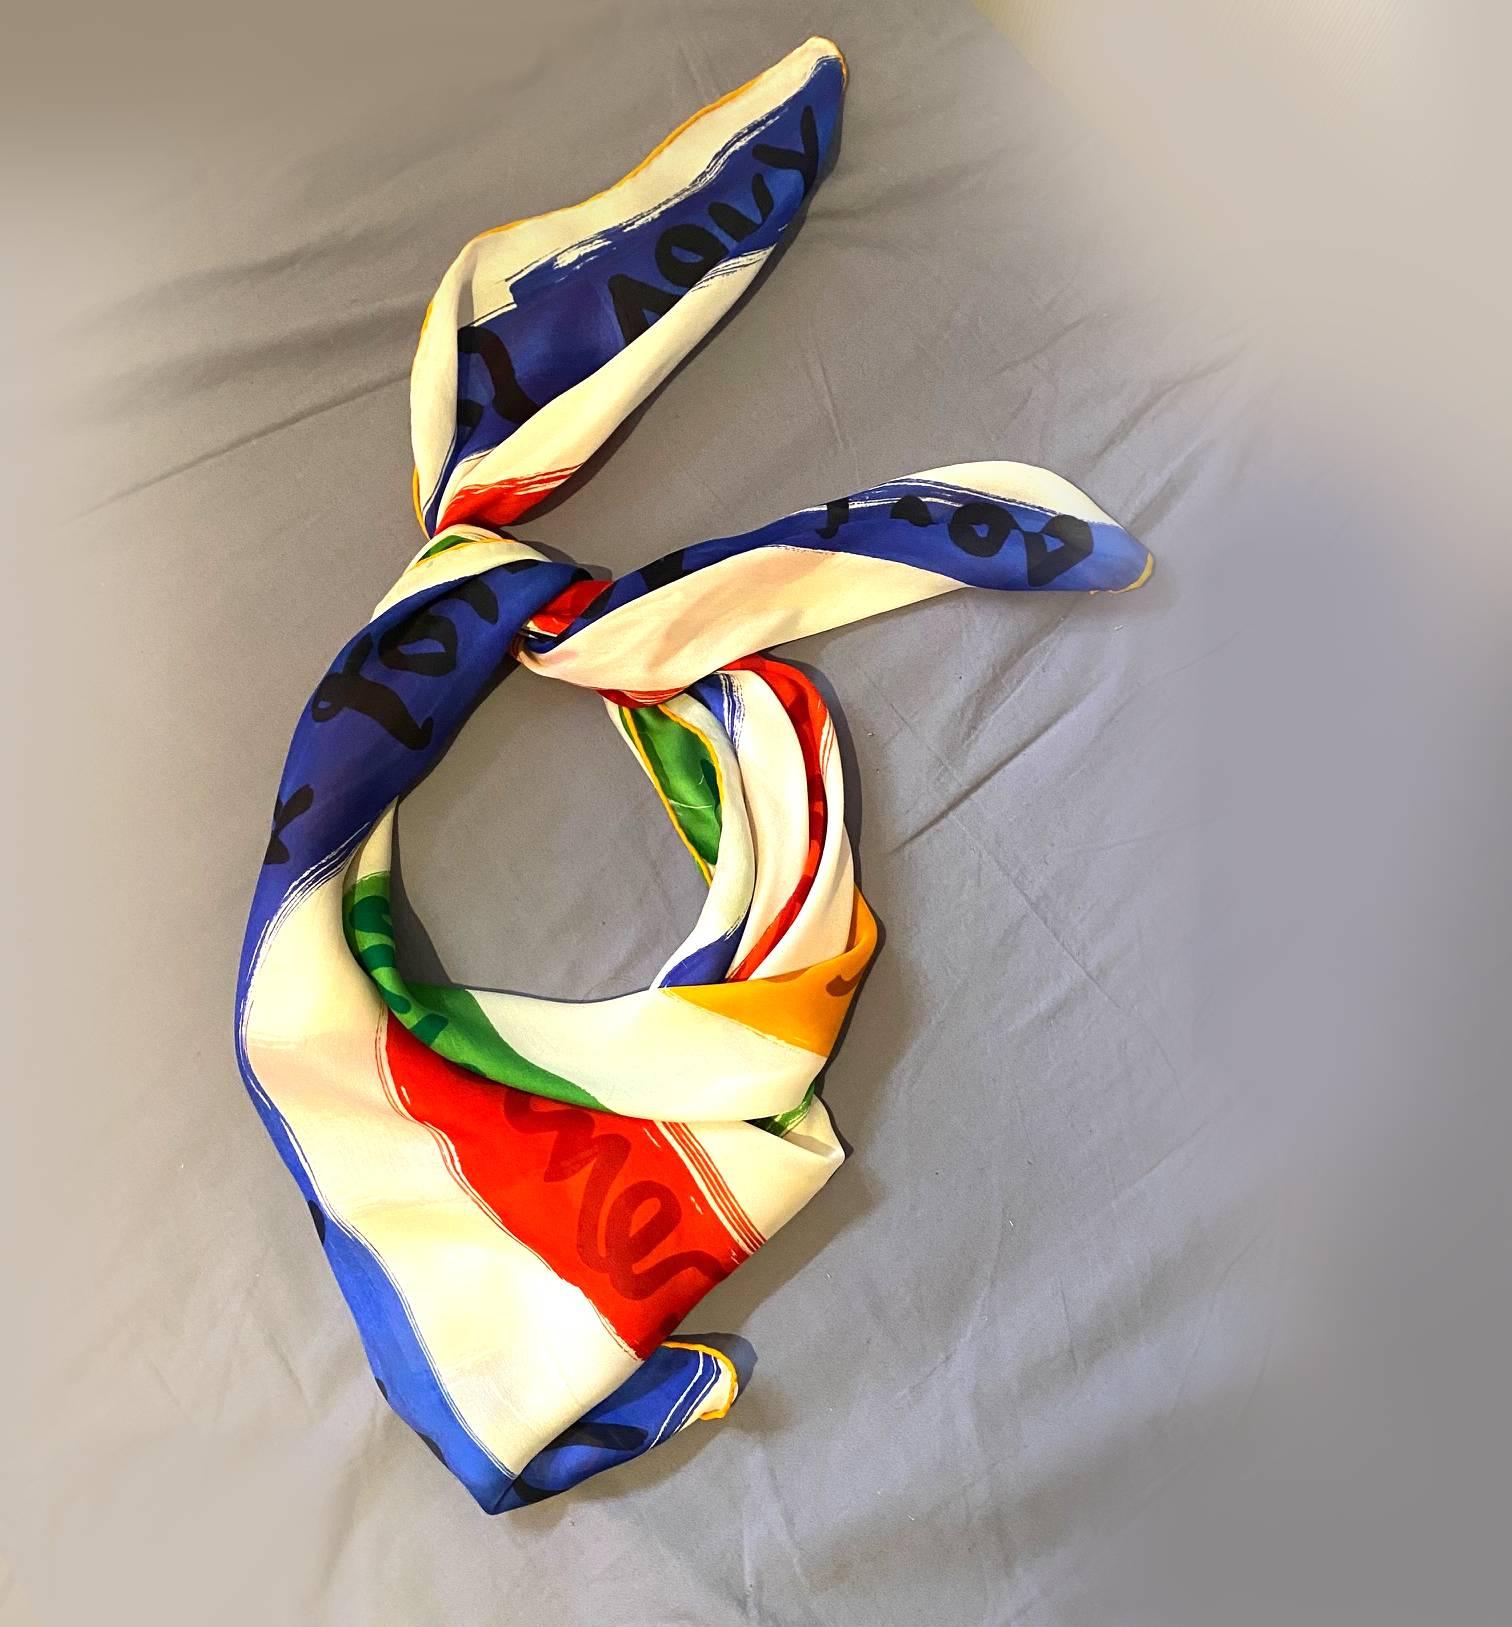 Yves Saint Laurent Silk square scarf, multicolor bold stripes on an ivory background, logo detail, silk chiffon, very light-weighted

Measurements: 84 x 84 cm

Condition: 1980s. very good, light sign of wear, original box included